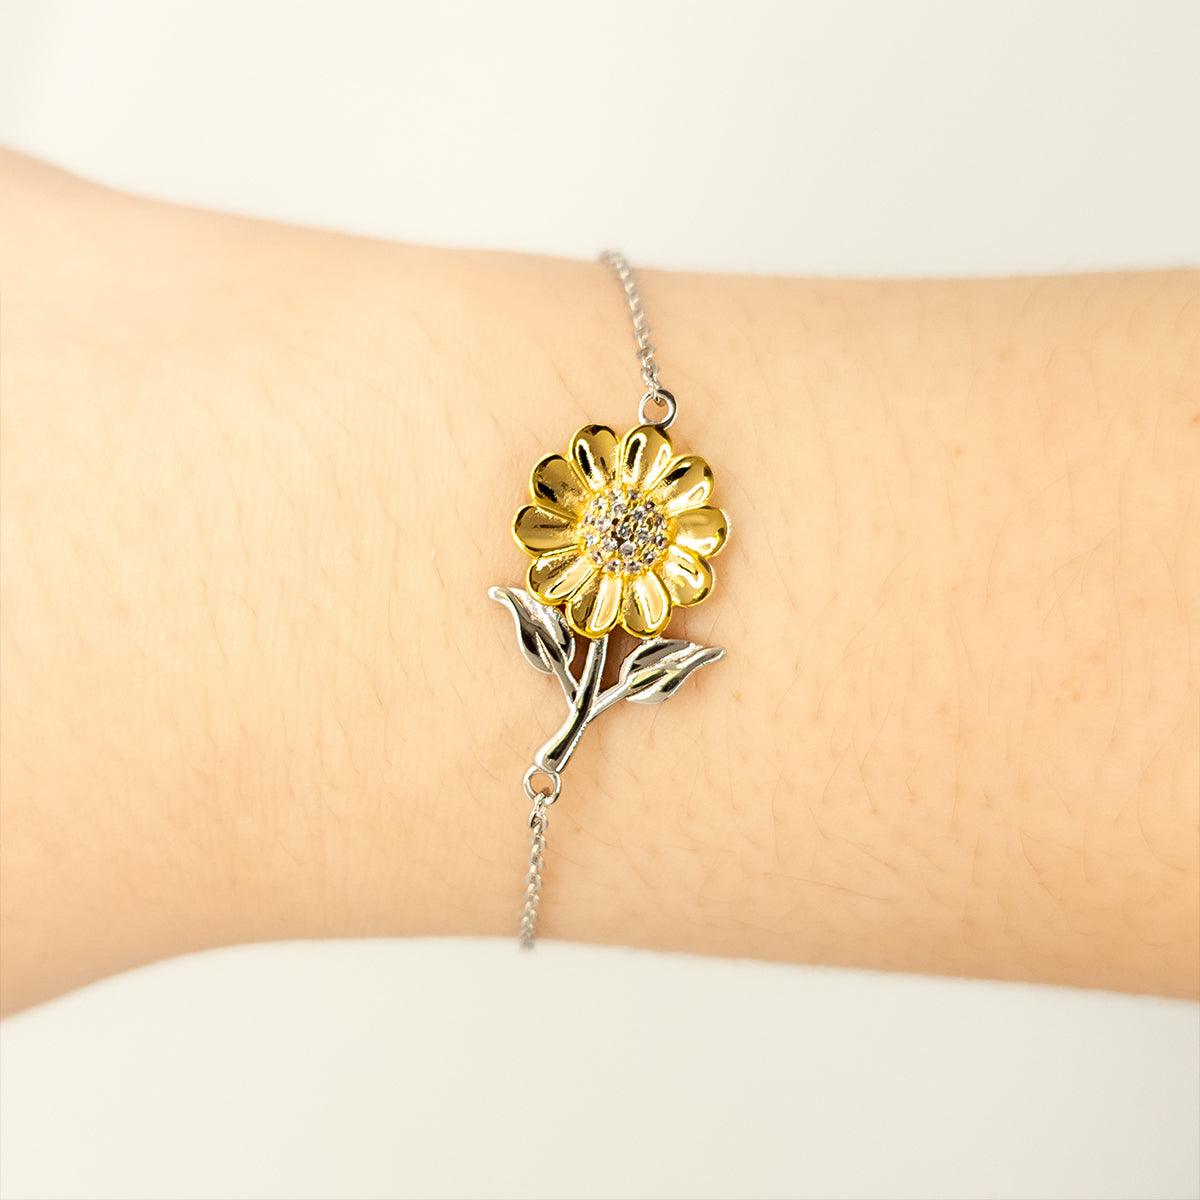 Goddaughter Christmas Perfect Gifts, Goddaughter Sunflower Bracelet, Motivational Goddaughter Message Card Gifts, Birthday Gifts For Goddaughter, To My Goddaughter Life is learning to dance in the rain, finding good in each day. I'm always with you - Mallard Moon Gift Shop